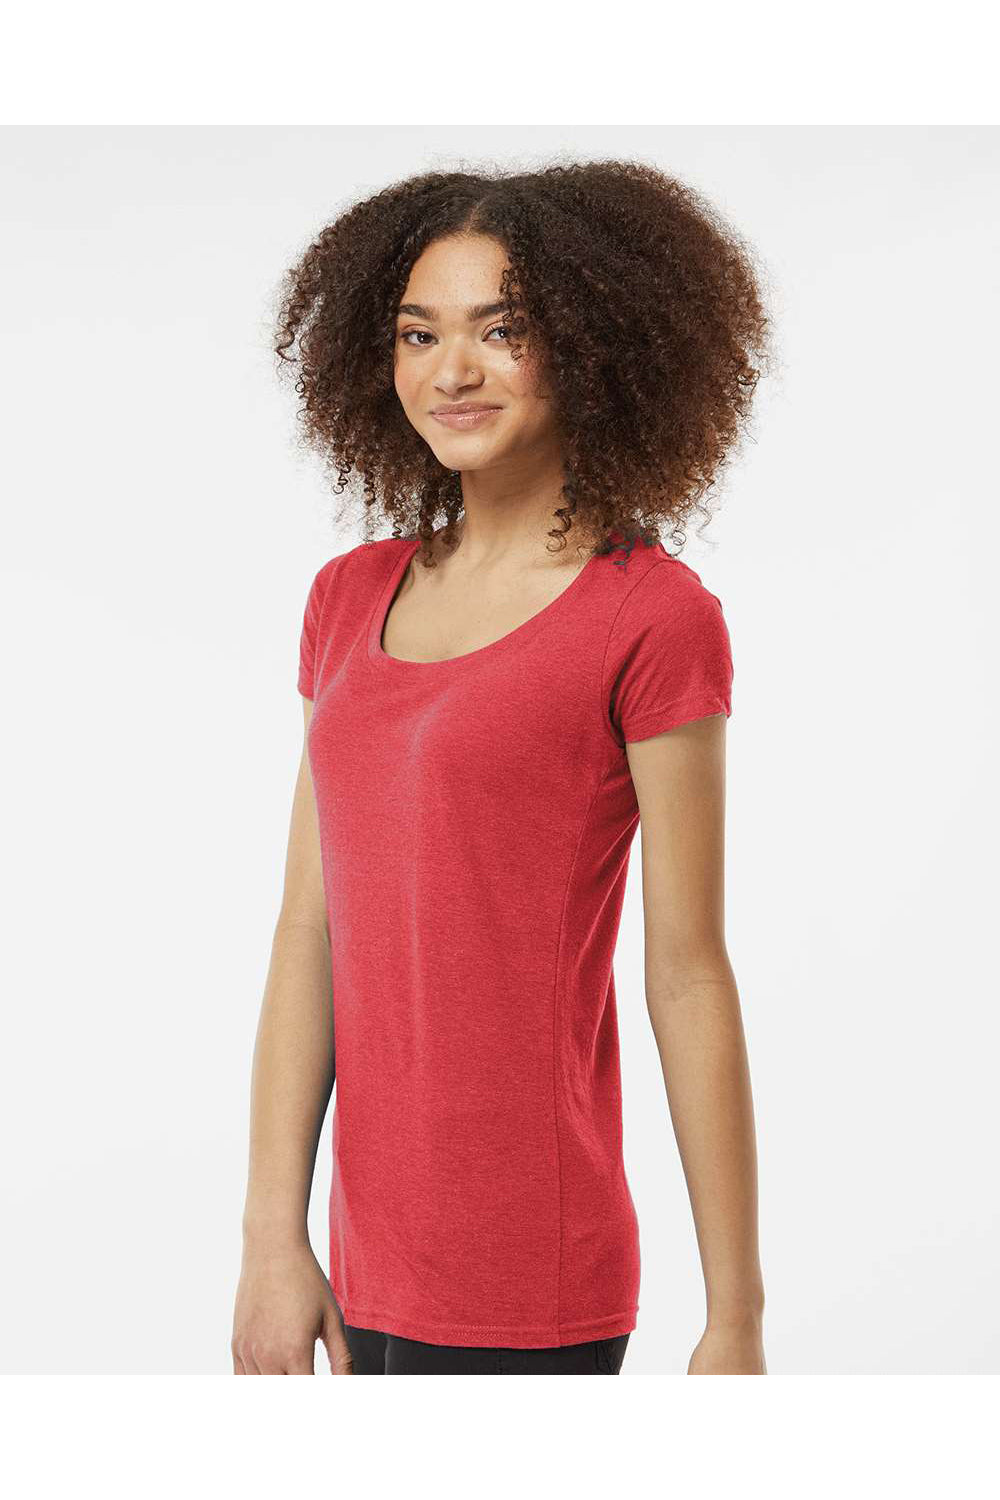 Tultex 243 Womens Poly-Rich Short Sleeve Scoop Neck T-Shirt Heather Red Model Side